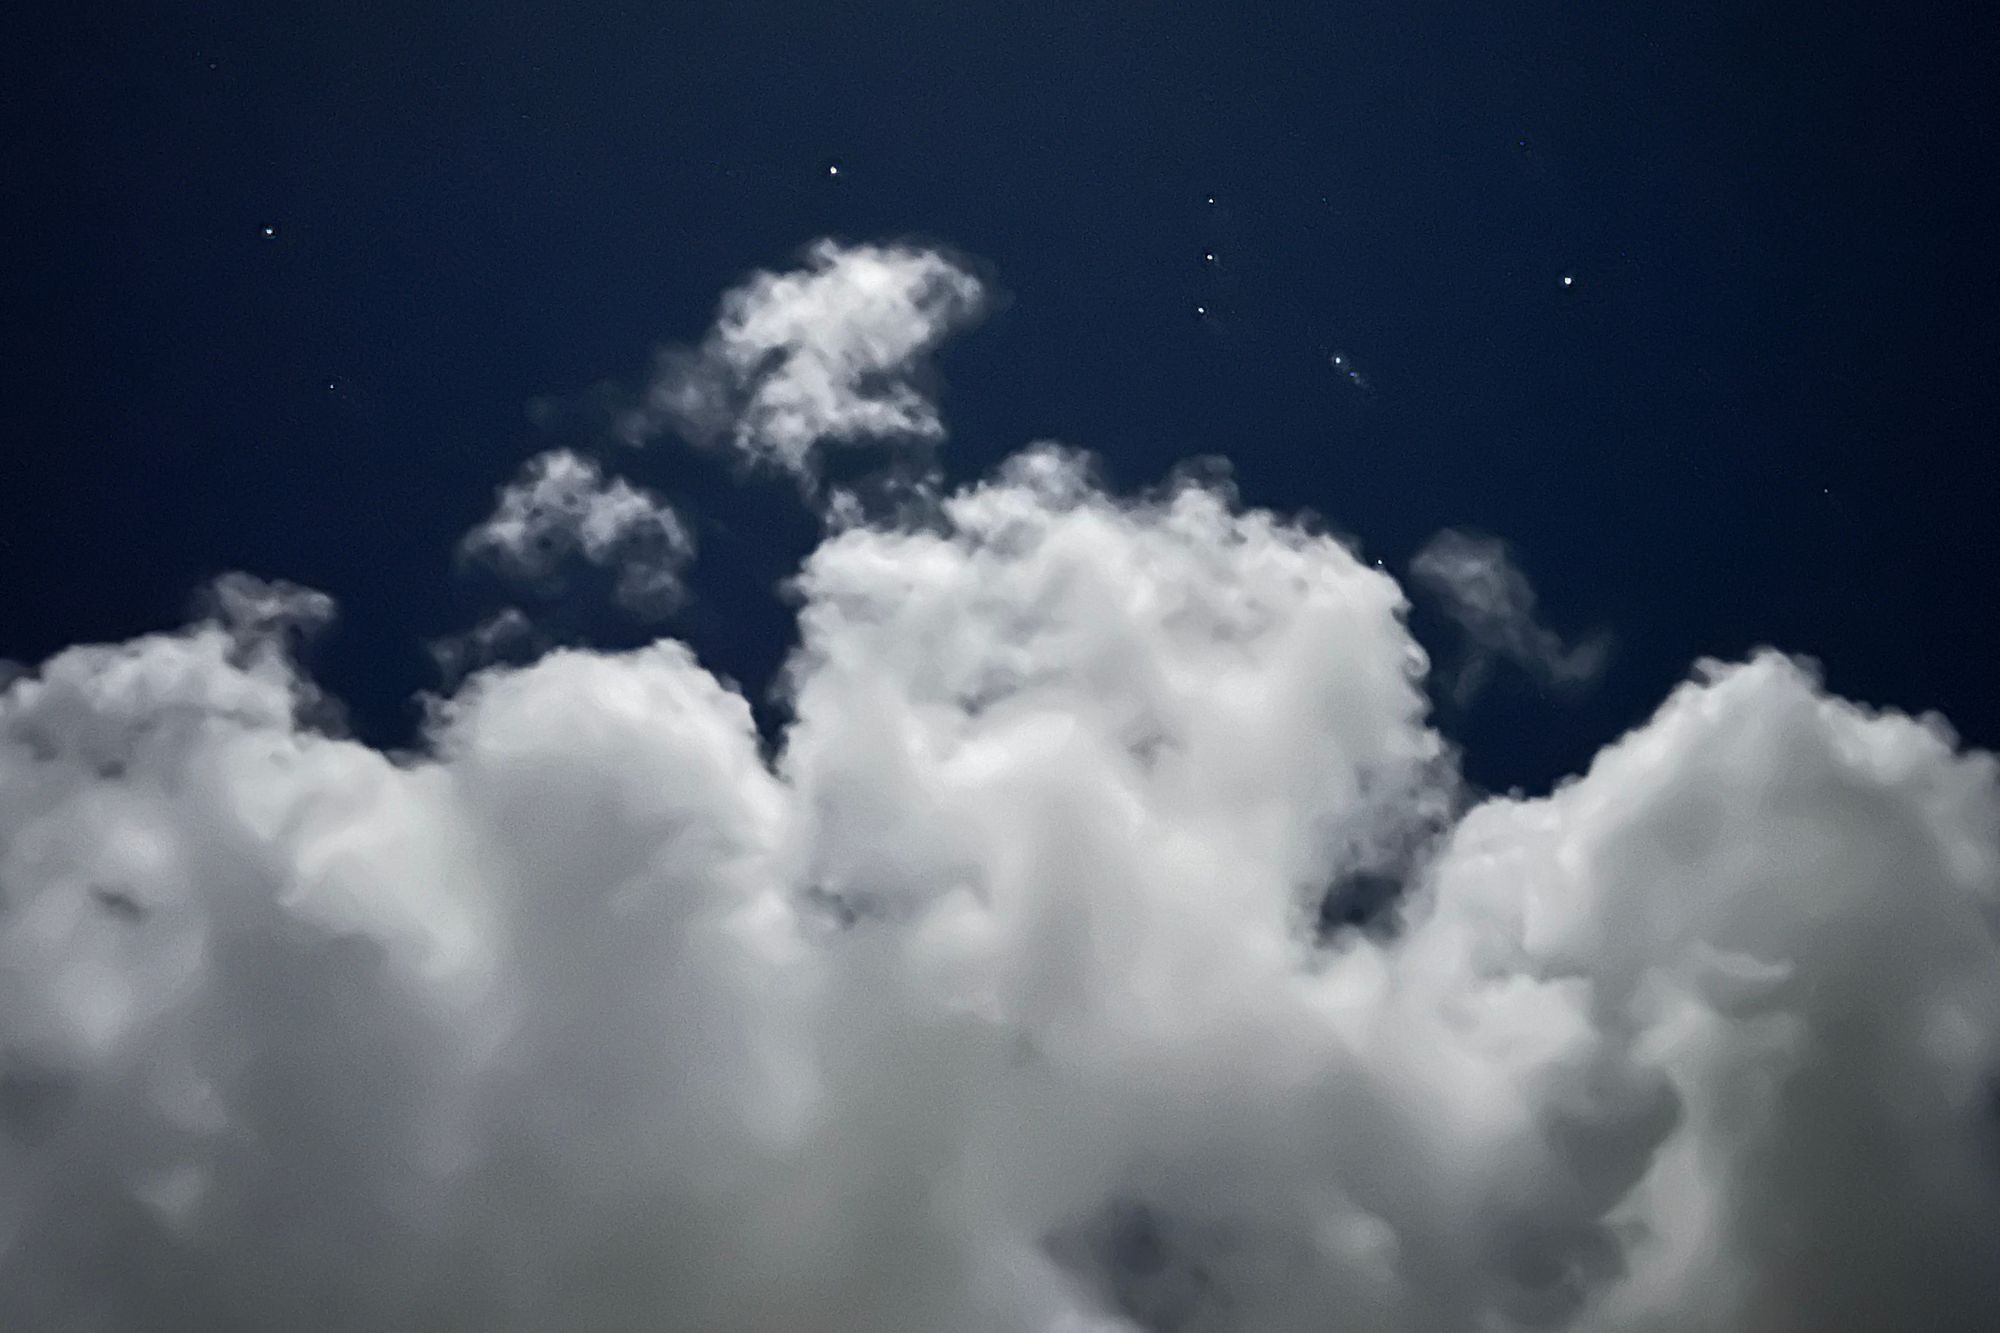 Clouds and a Starry Sky [Frederick Lane, 2022]